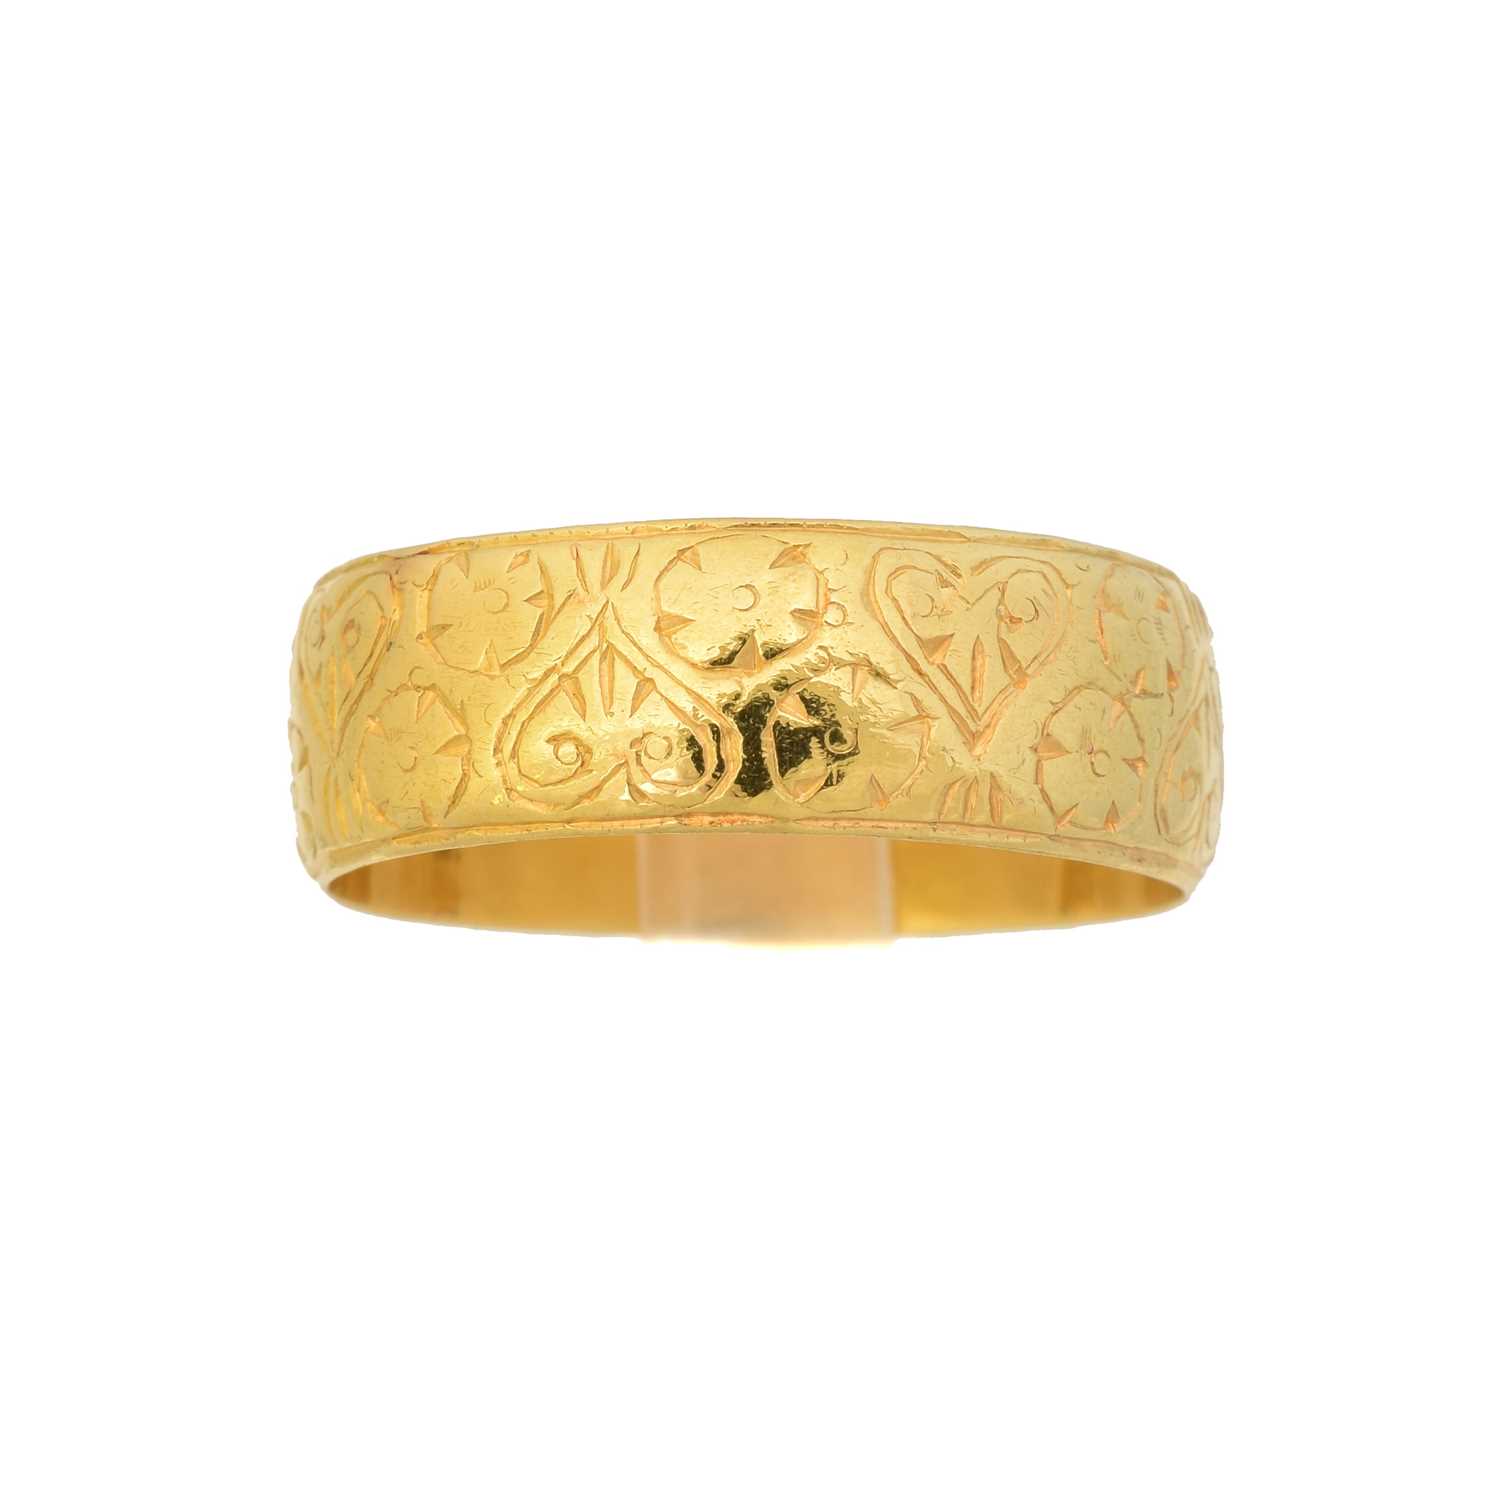 Lot 121 - An early 20th century 22ct gold band ring